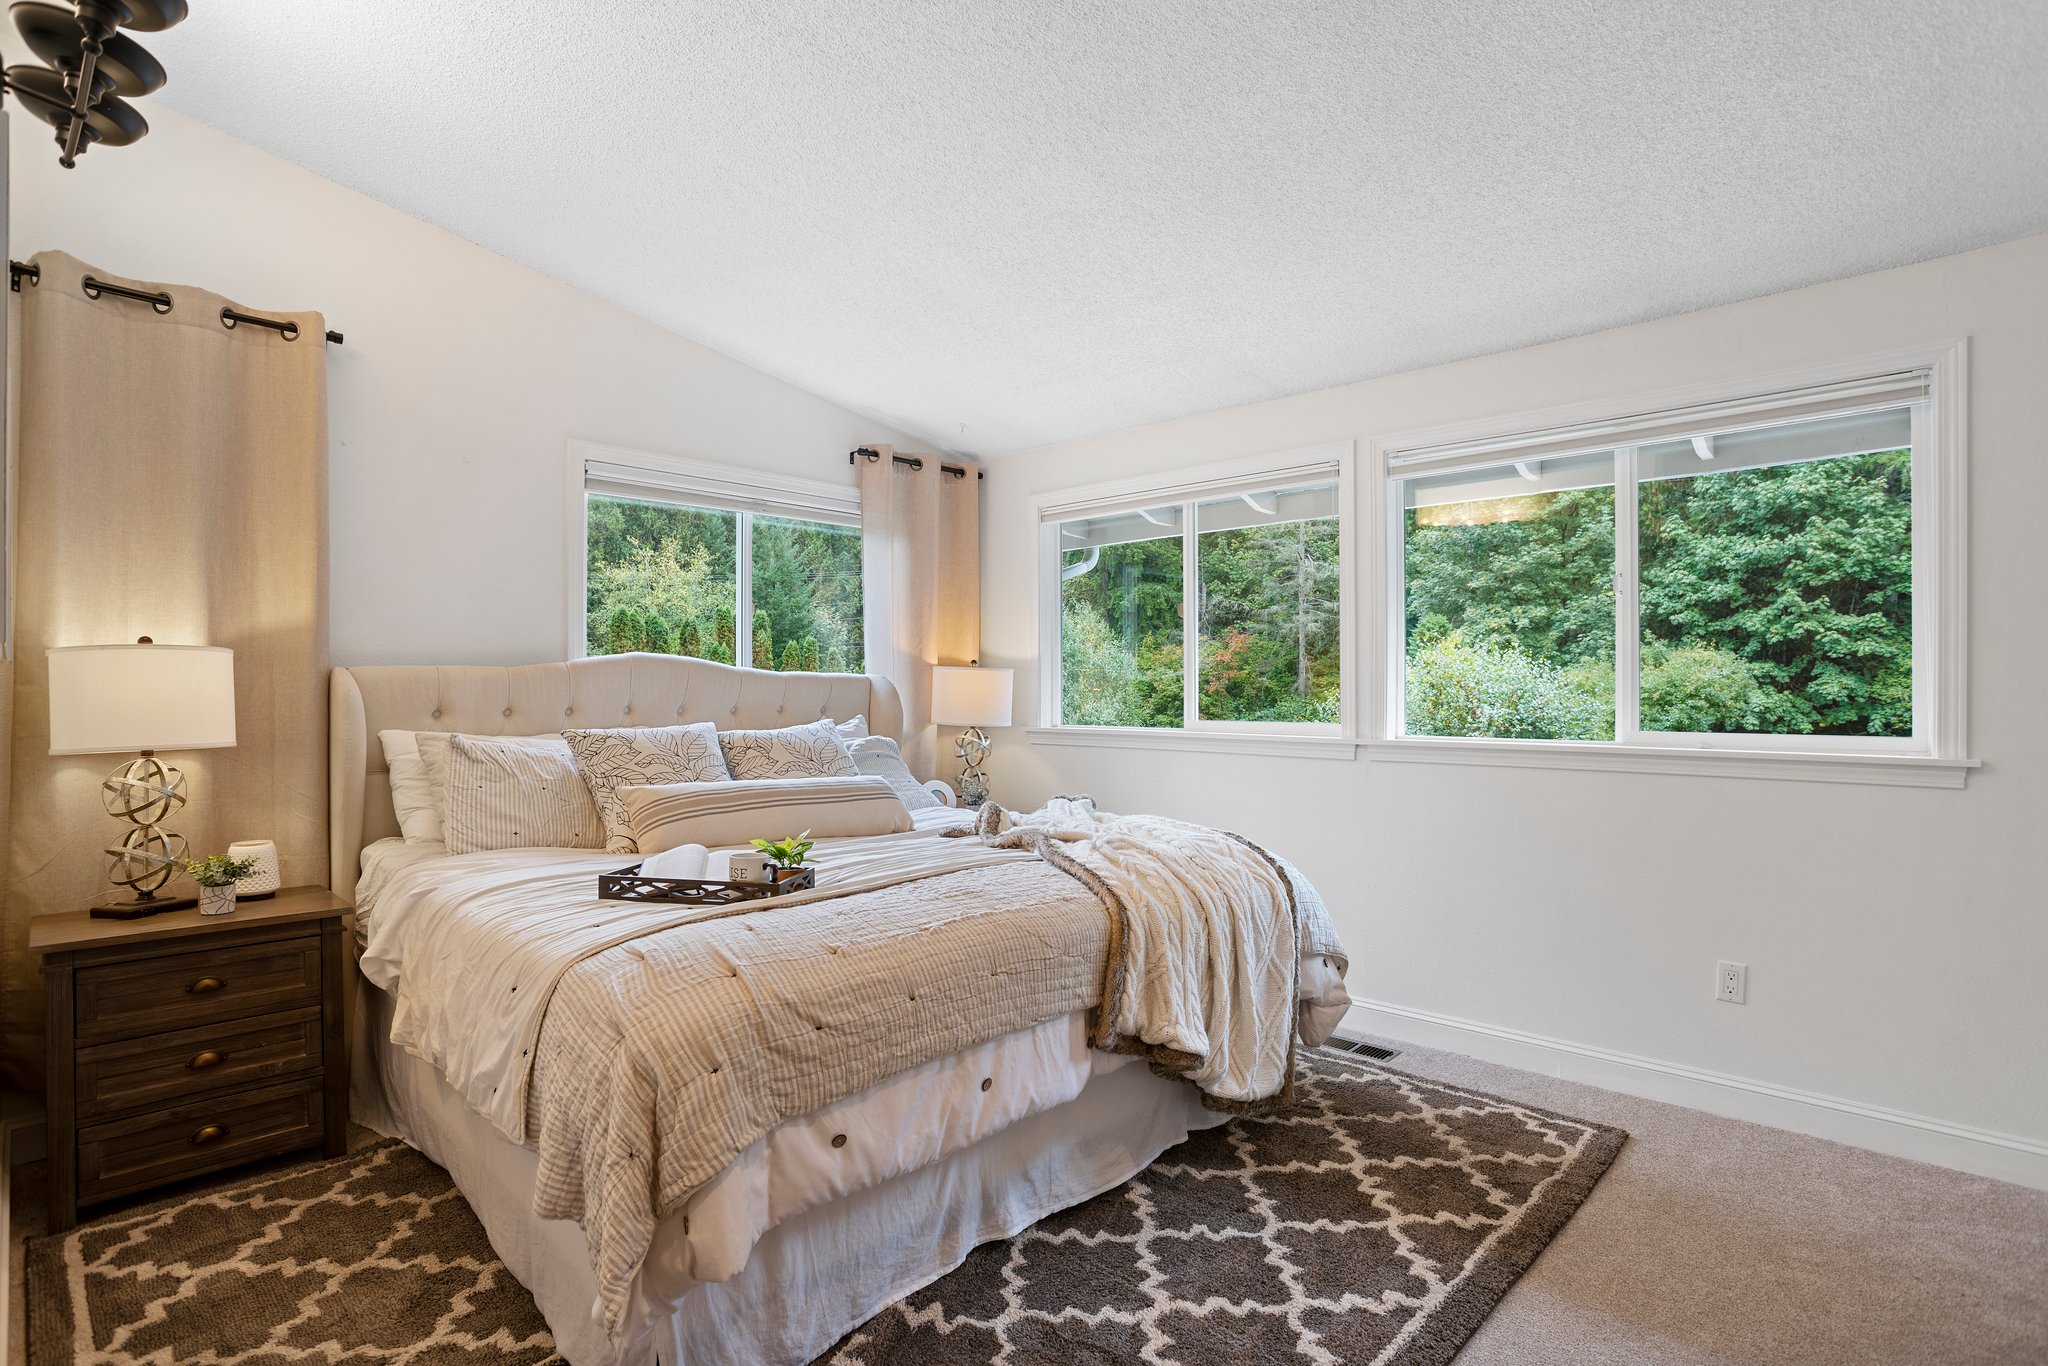 Master Bedroom fits a Kingsize bed comfortably. Large windows make this room light and bright!